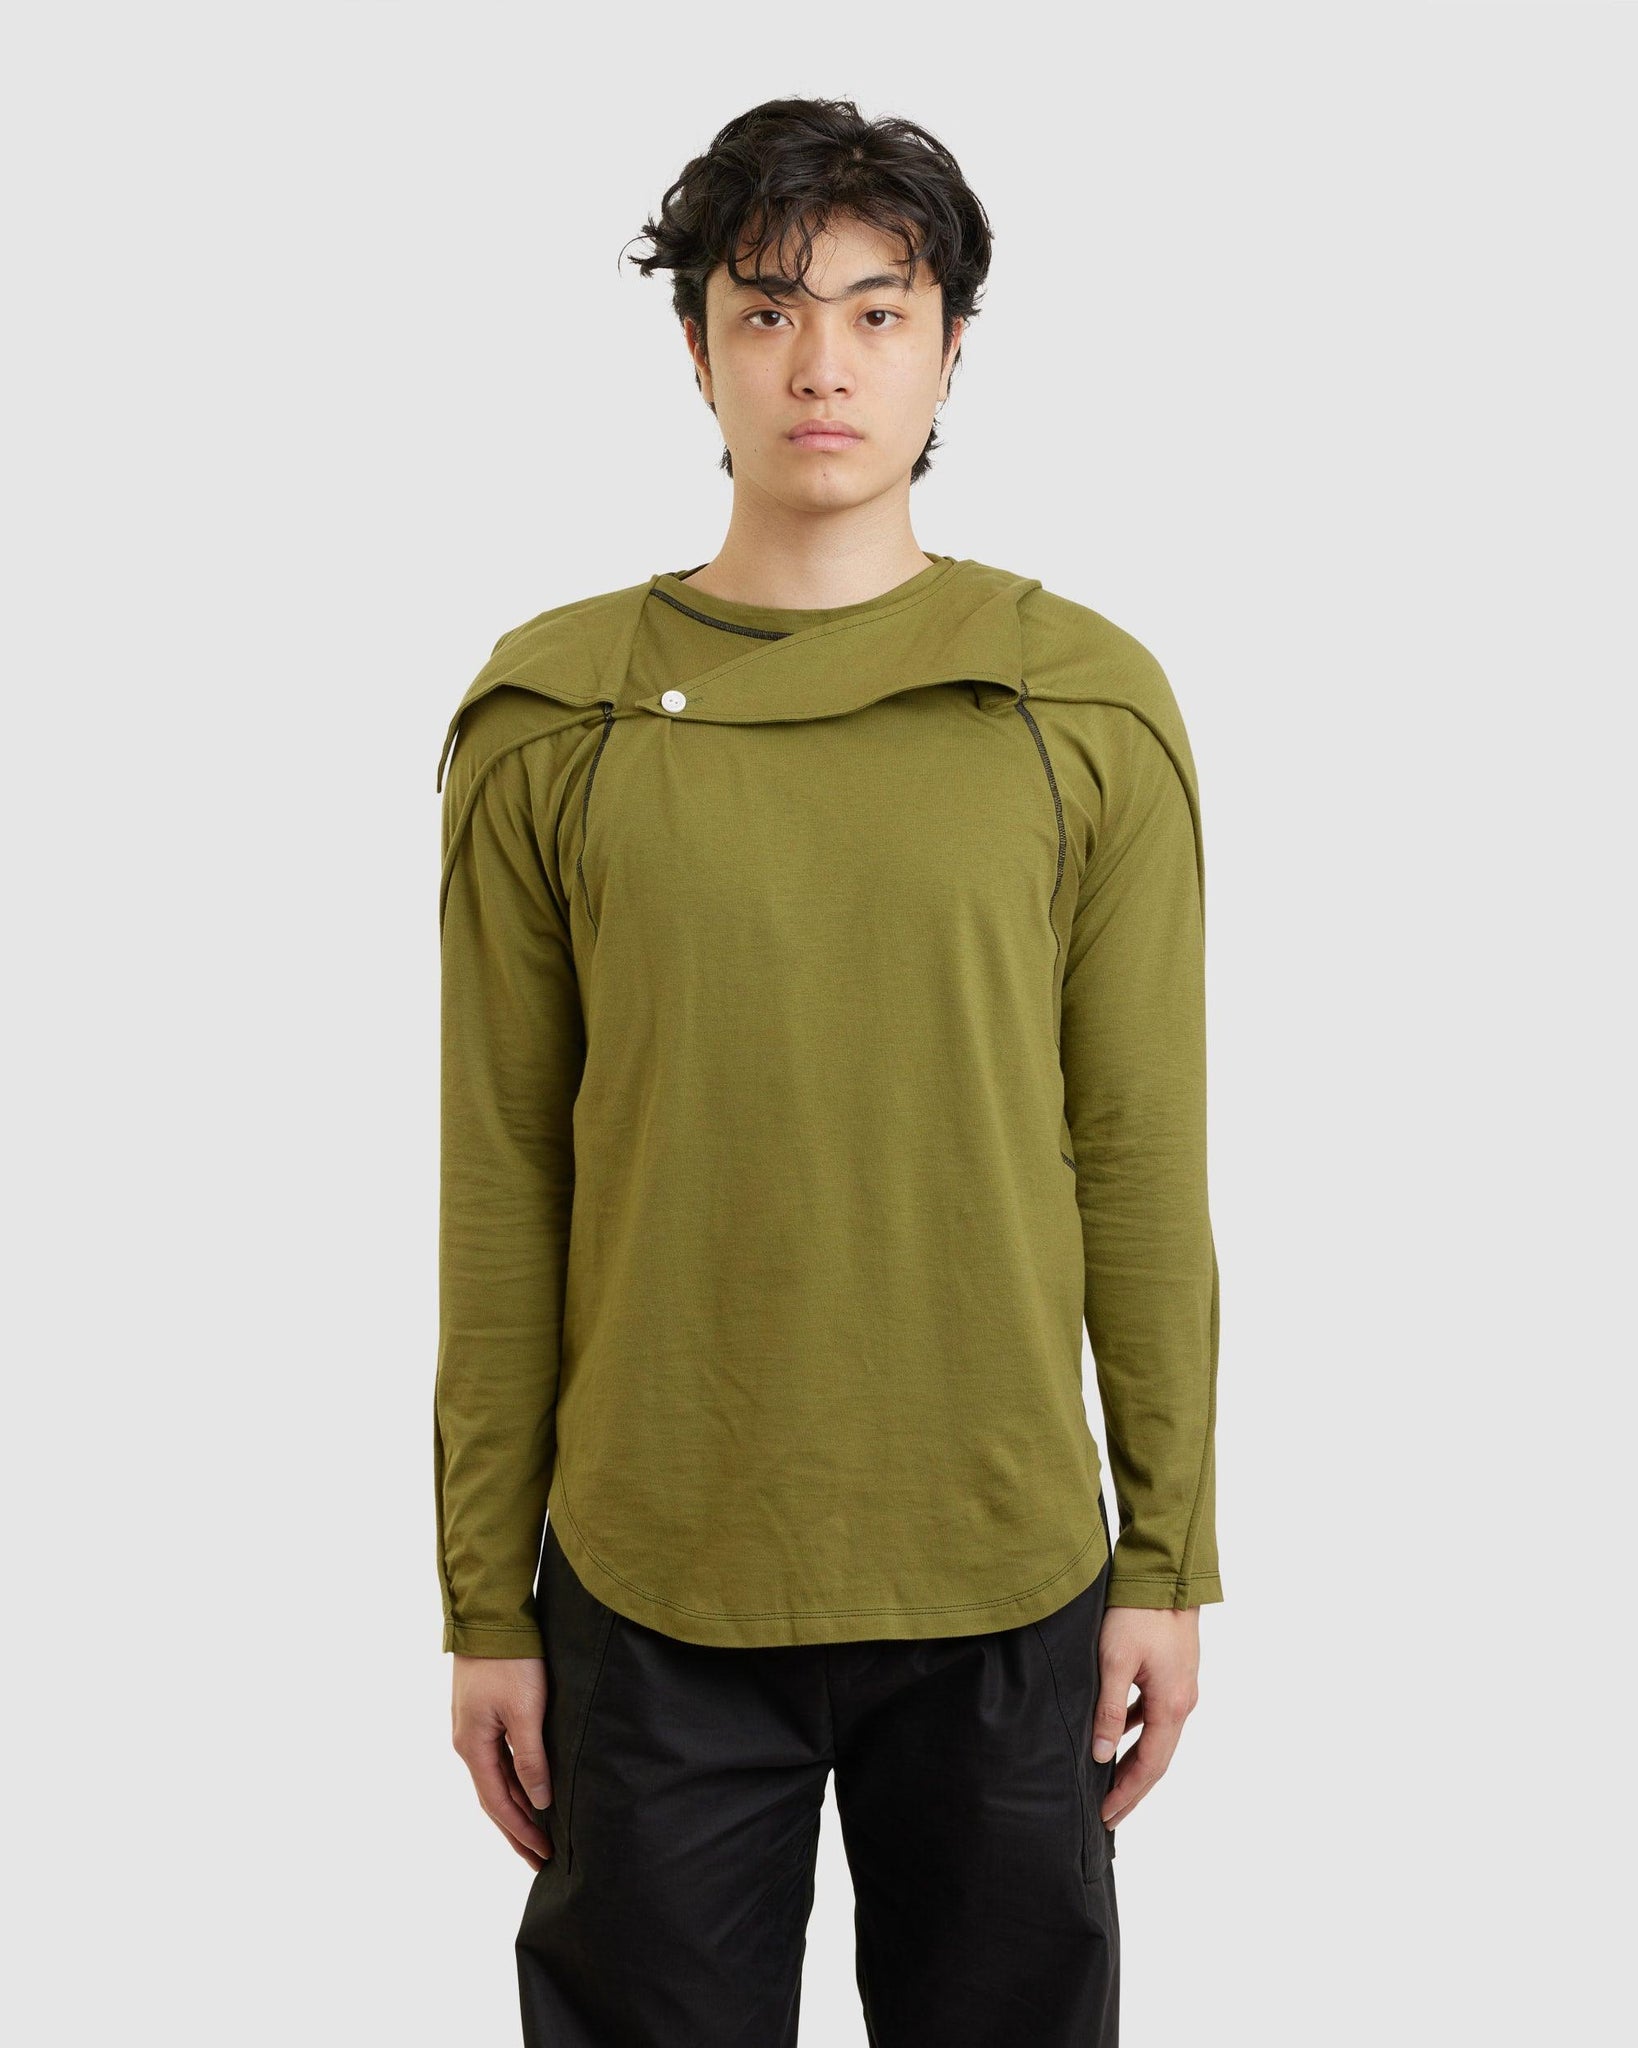 Solon Hooded Top - {{ collection.title }} - Chinatown Country Club 